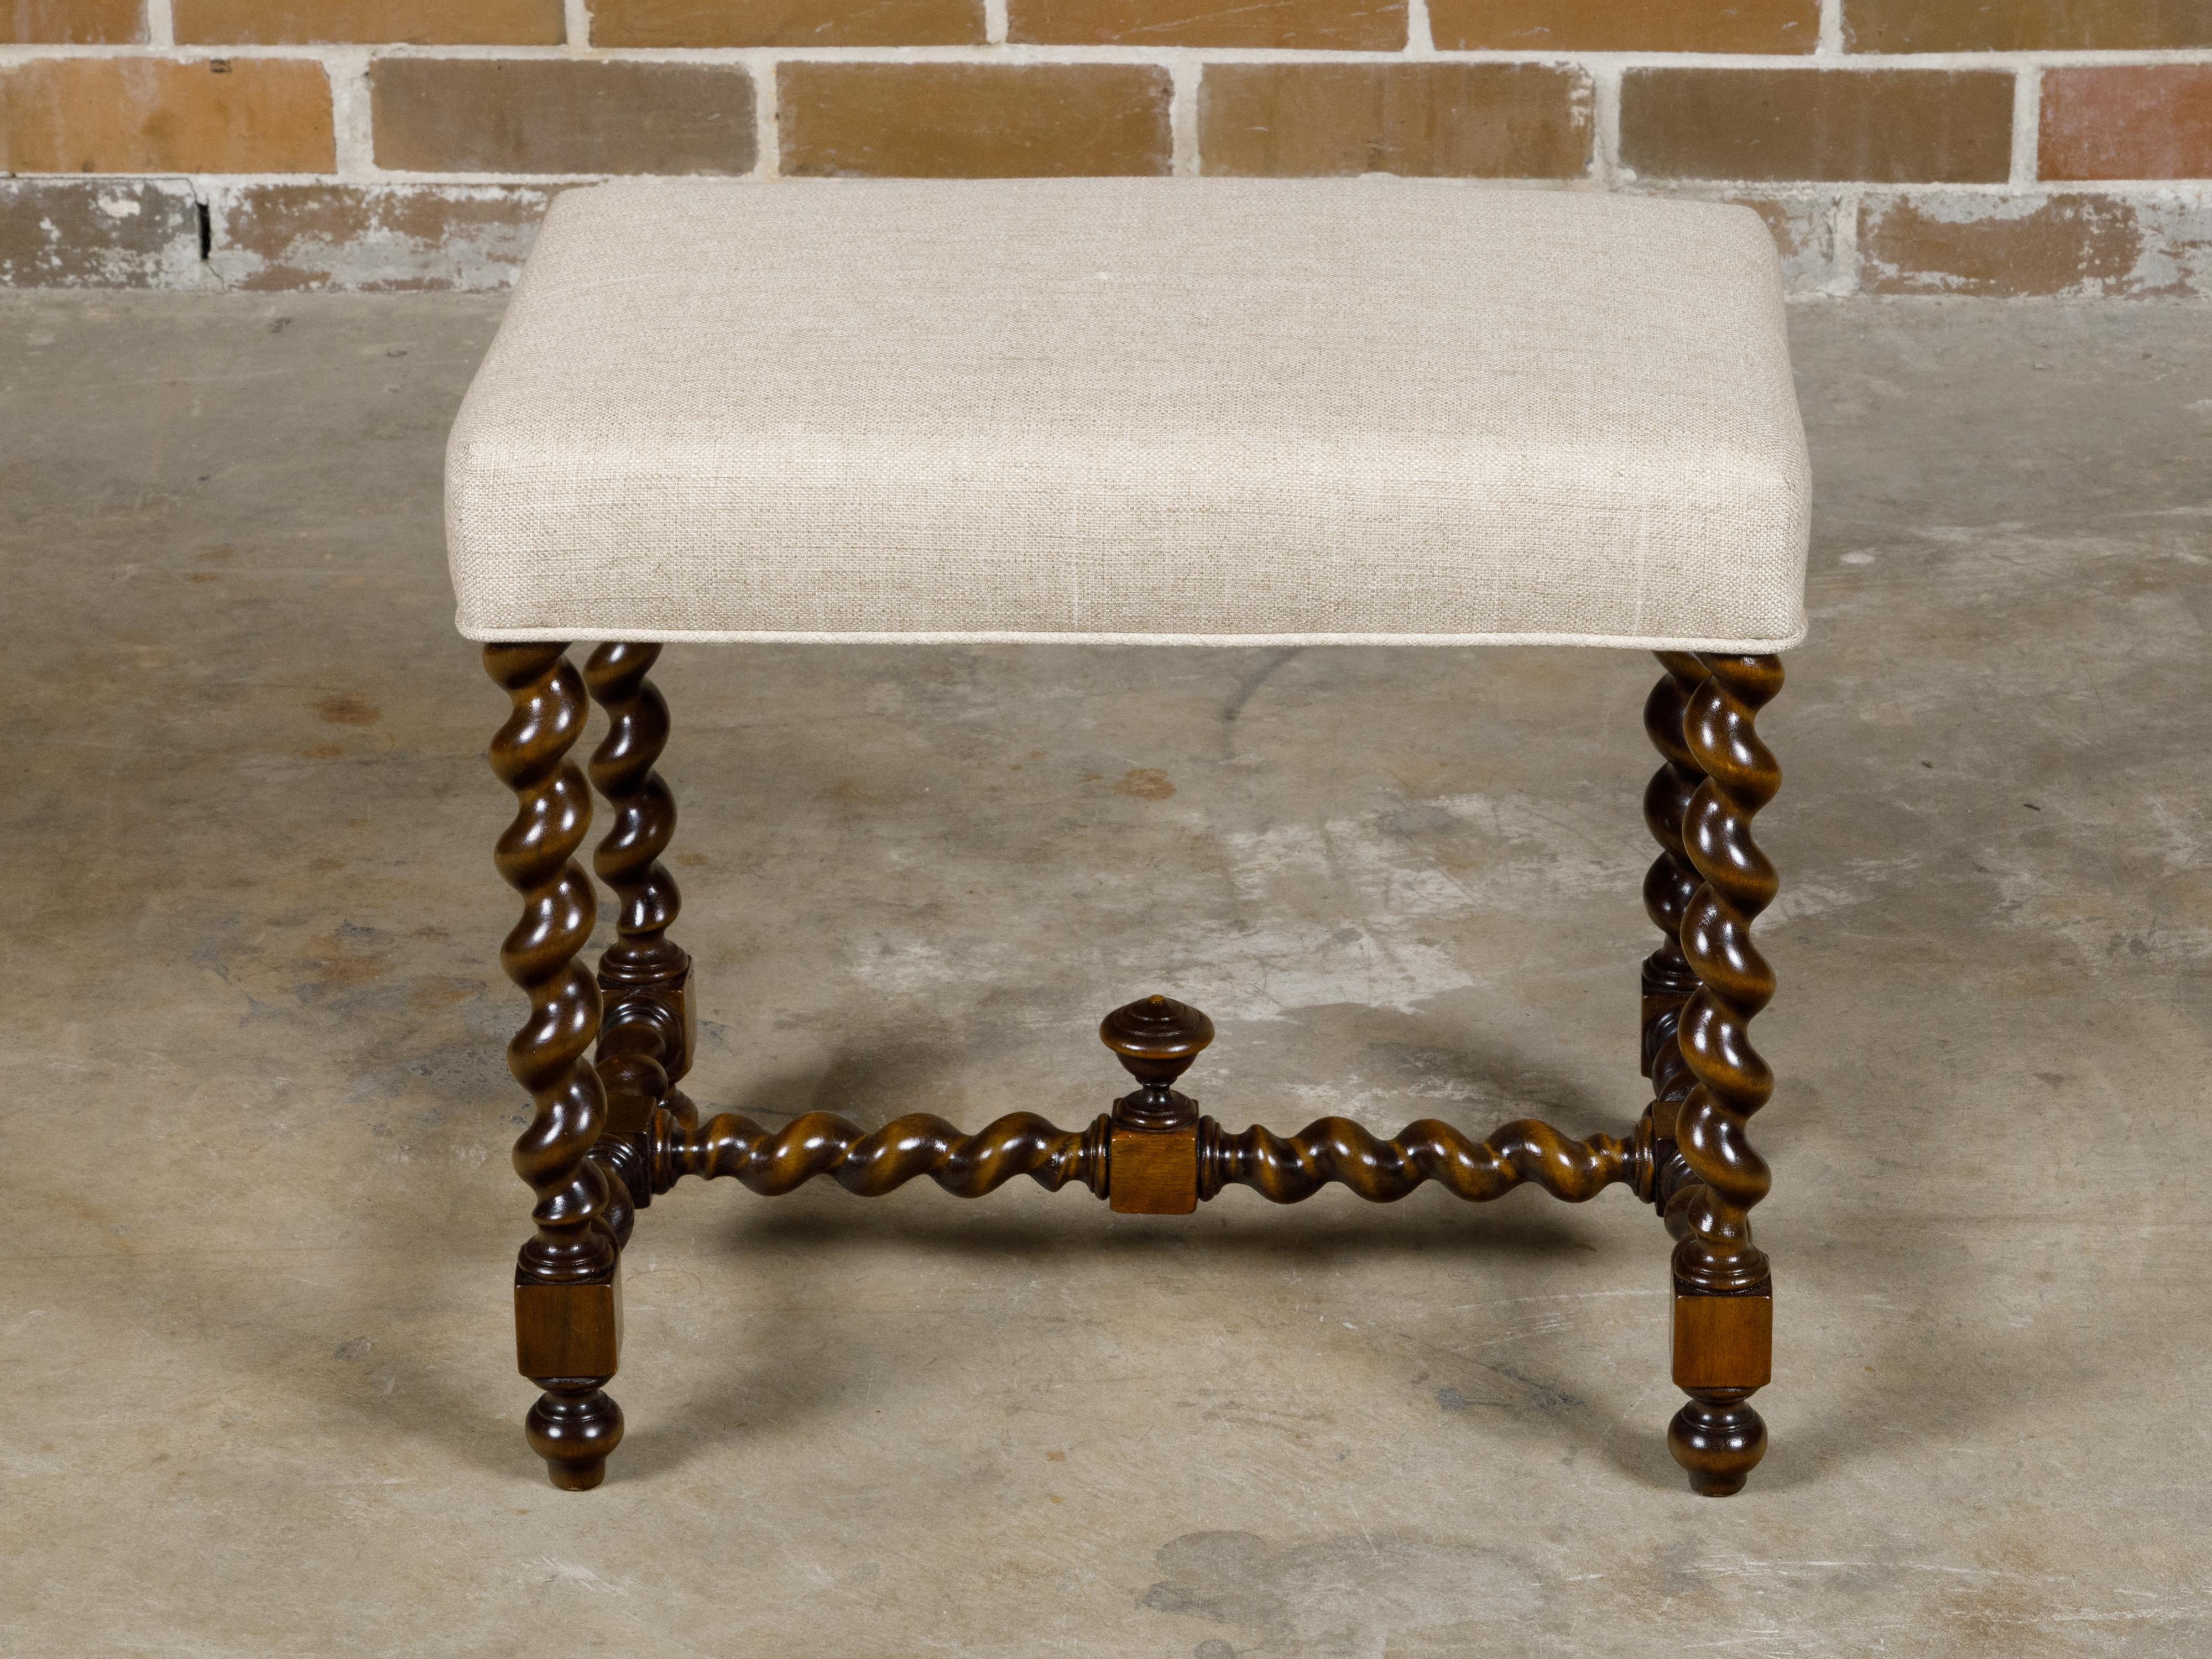 An English oak barley twist stool from the 19th century with cross stretcher and custom linen upholstery. This oak stool, featuring intricately twisted barley legs, a cross stretcher with a central finial, and custom linen upholstery, is a testament